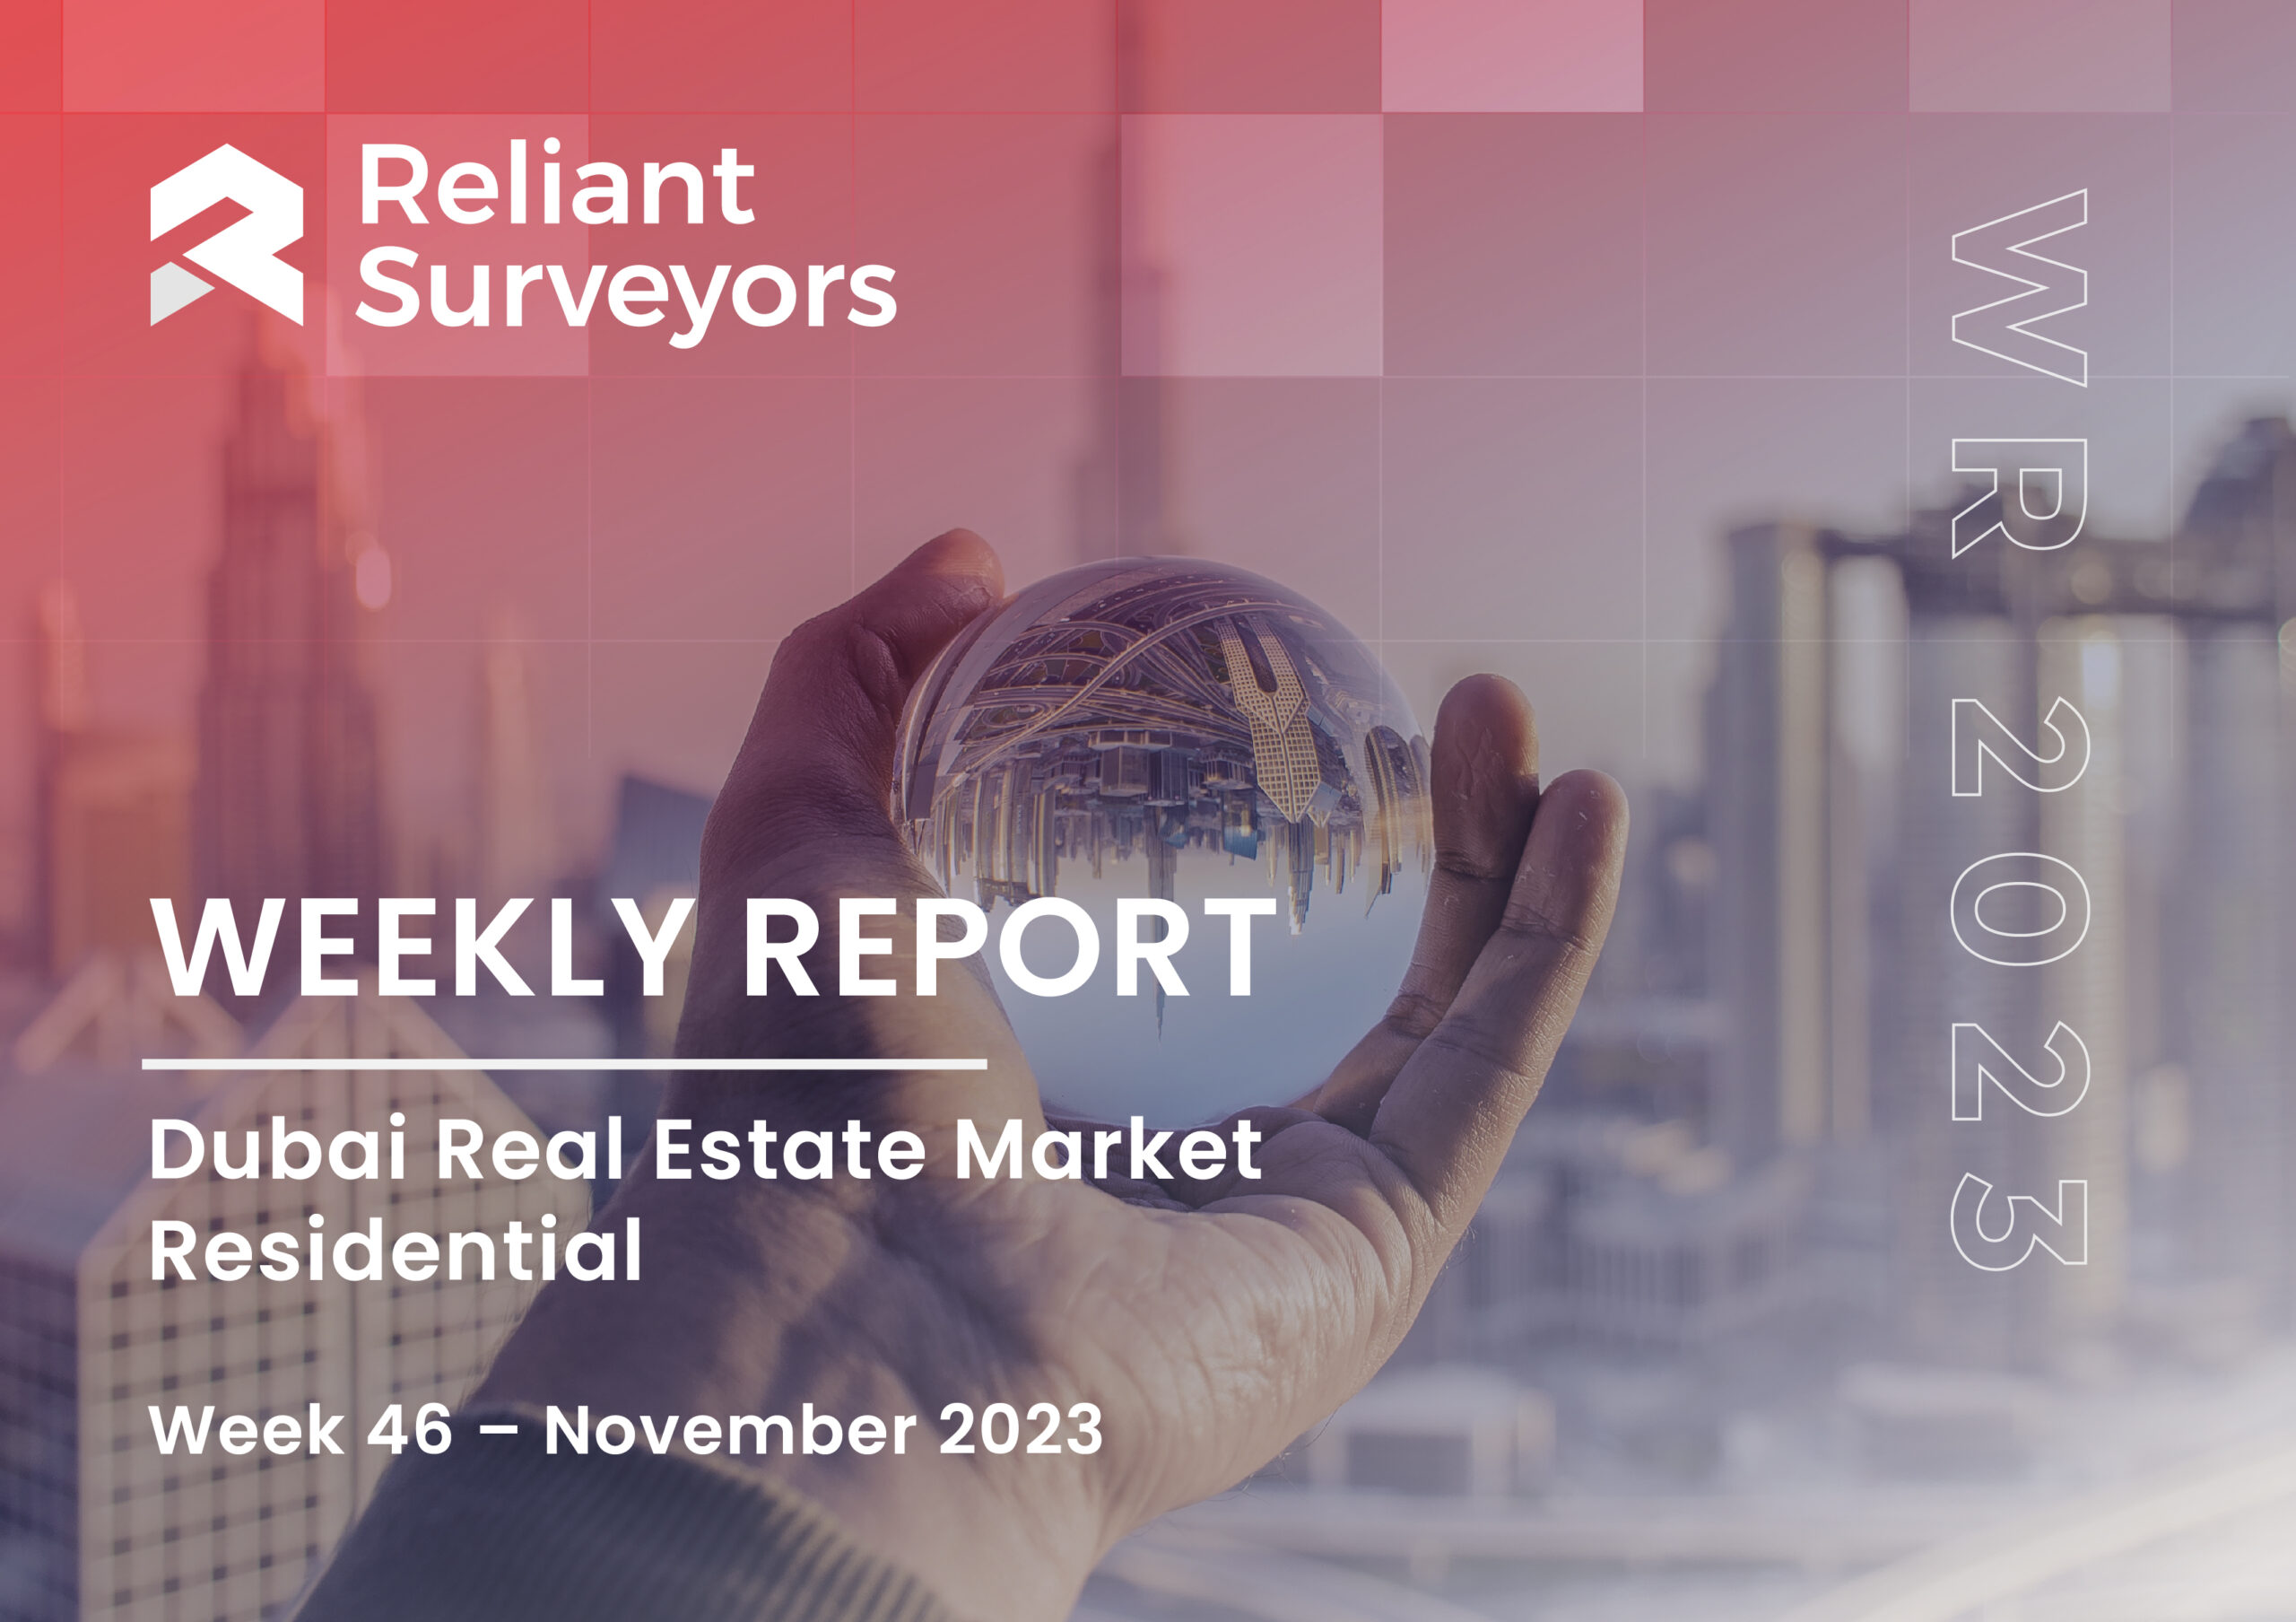 Reliant Surveyors weekly reports 46 - Dubai real estate market - residential